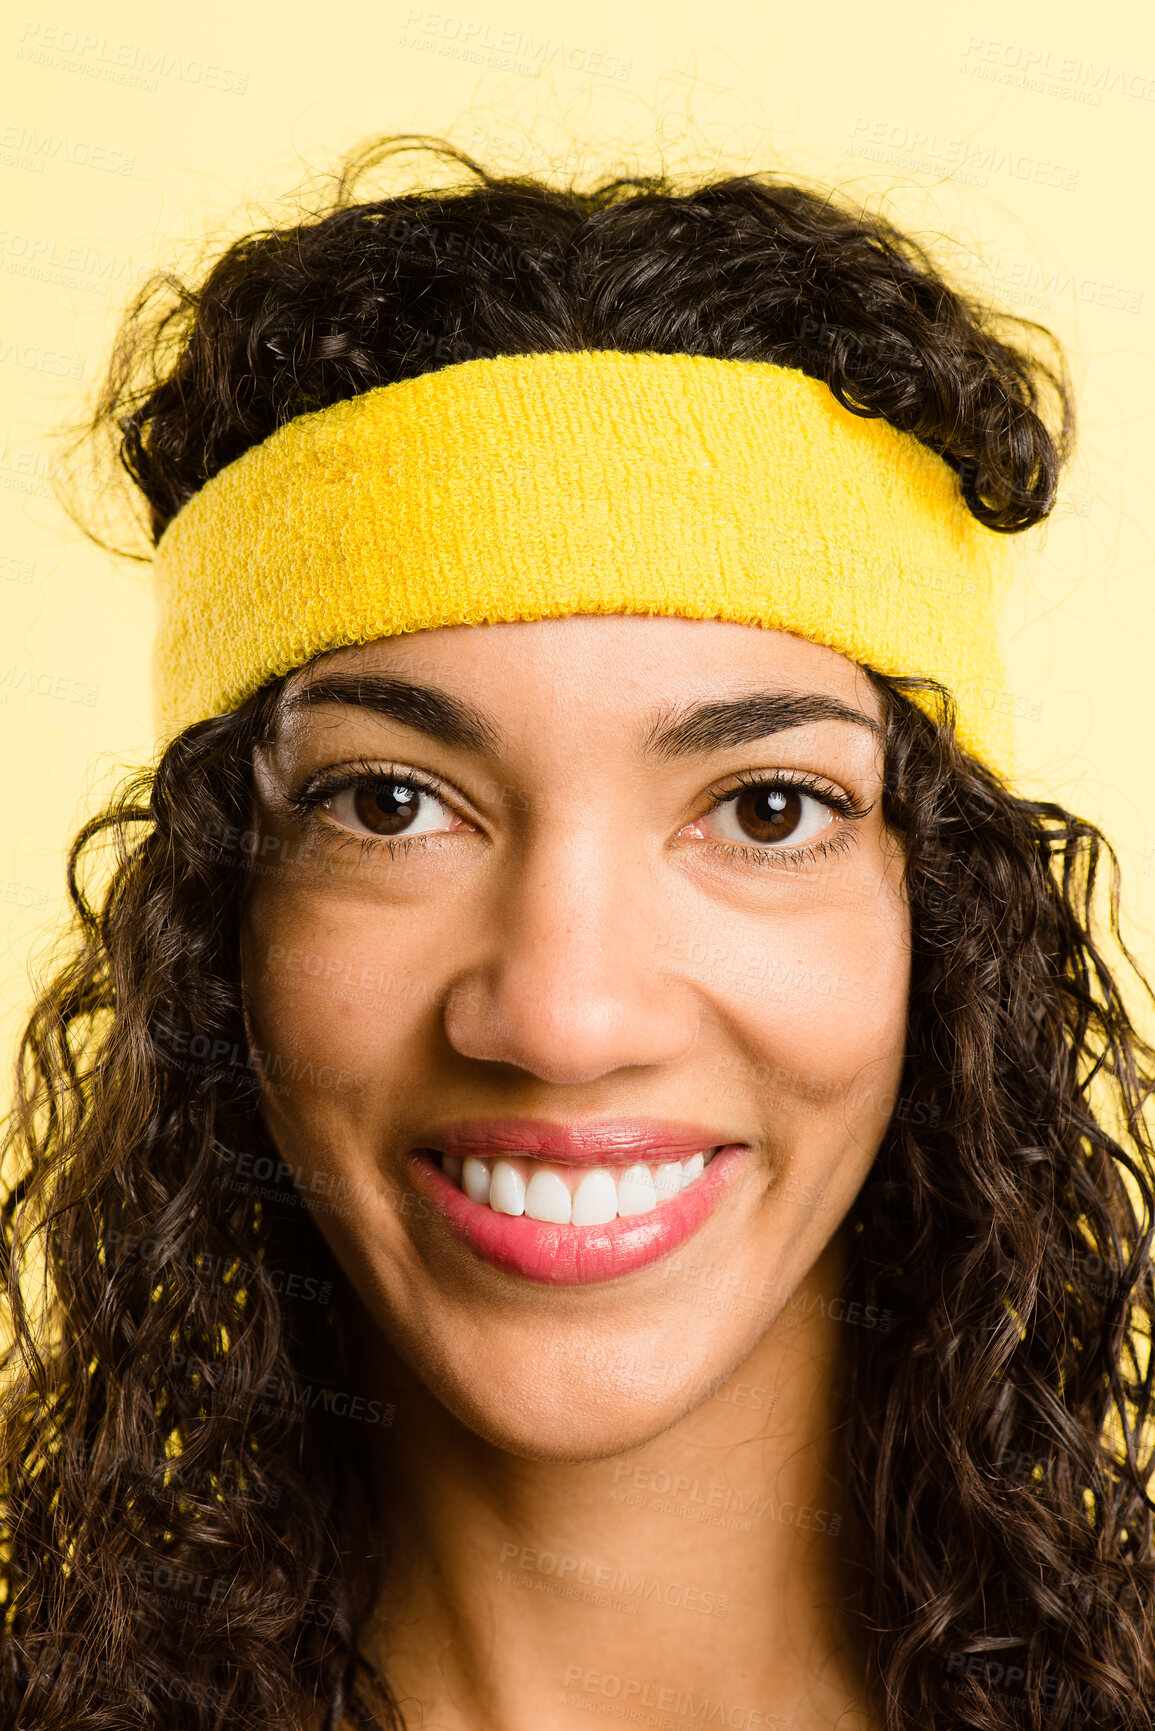 Buy stock photo Shot of an attractive young woman standing alone in the studio and posing while wearing a headband